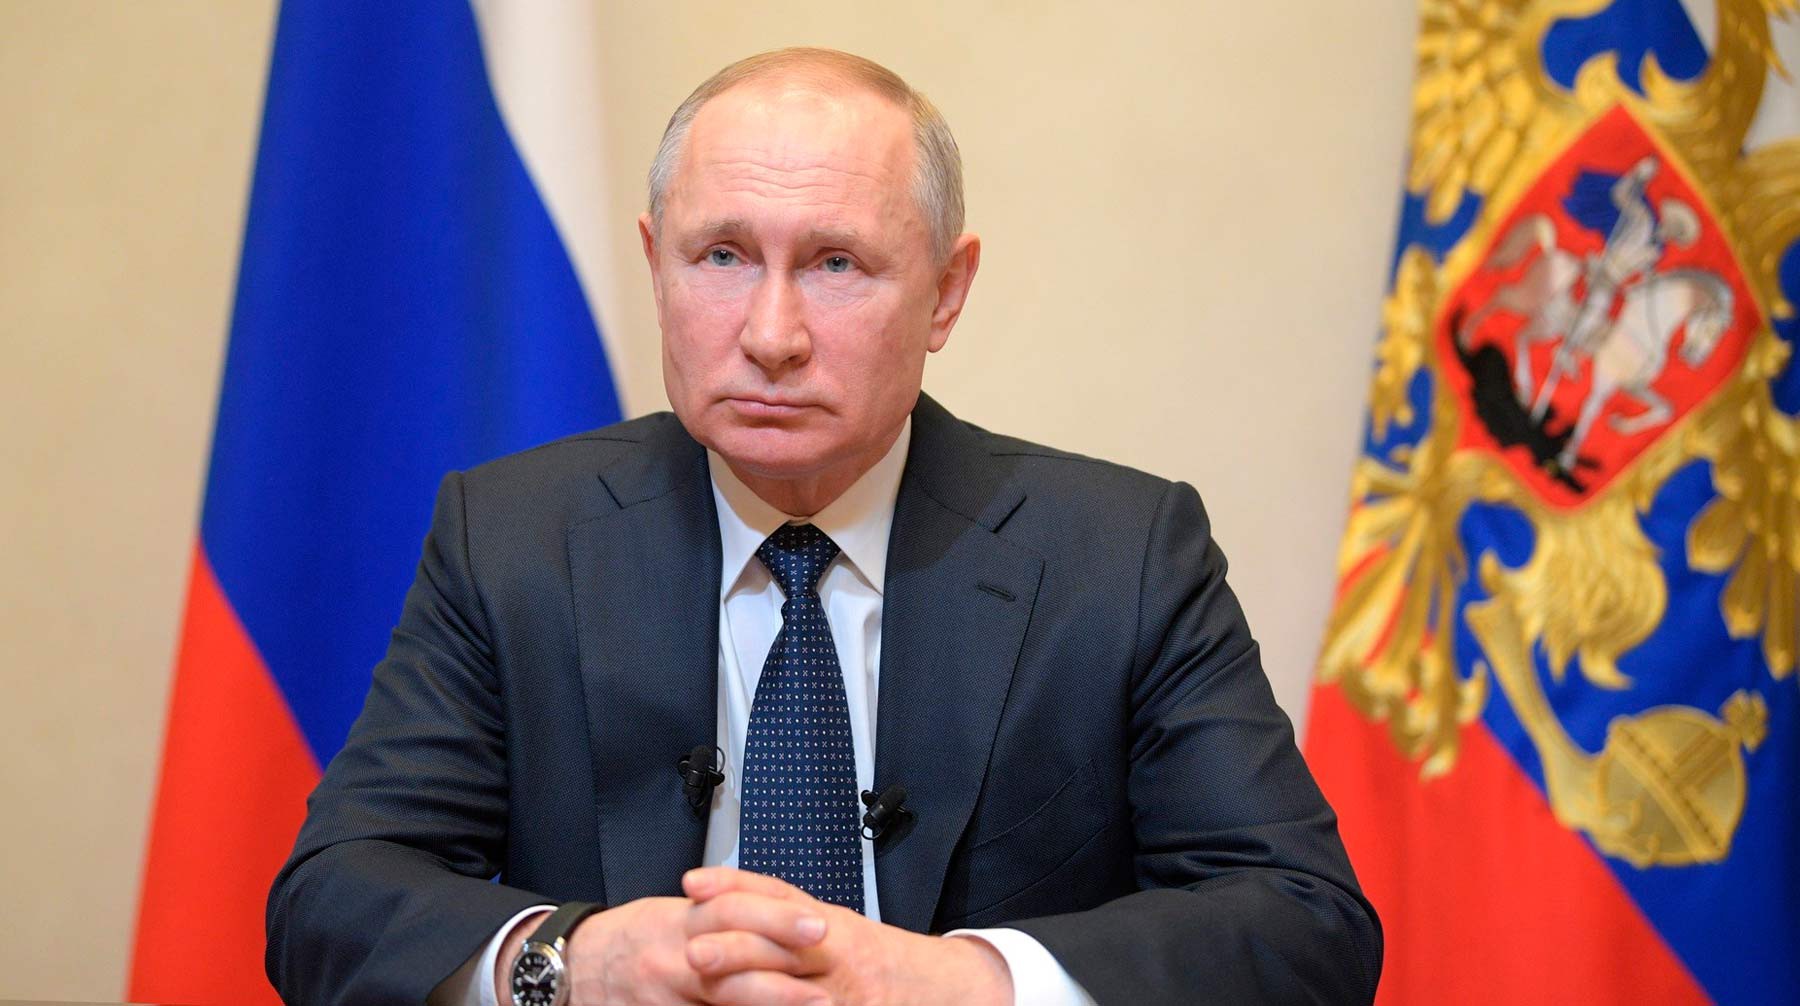 Putin said it was impossible to spoil the already tainted relations with the United States